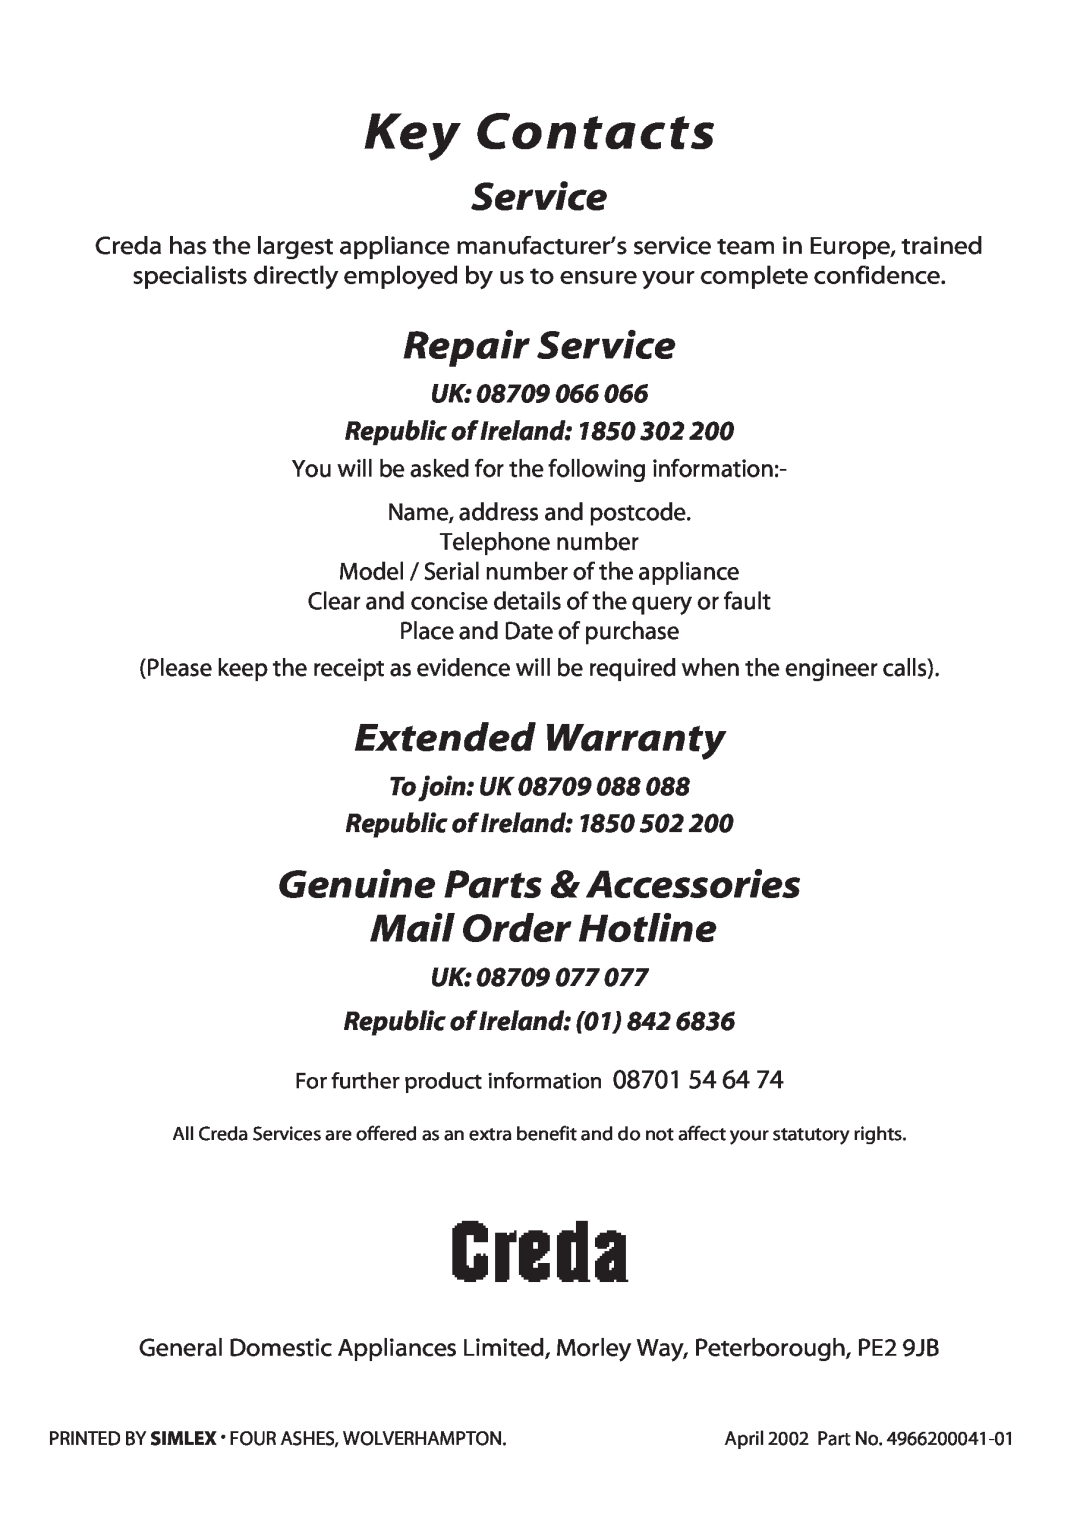 Creda X152 Key Contacts, Repair Service, Extended Warranty, Genuine Parts & Accessories Mail Order Hotline 